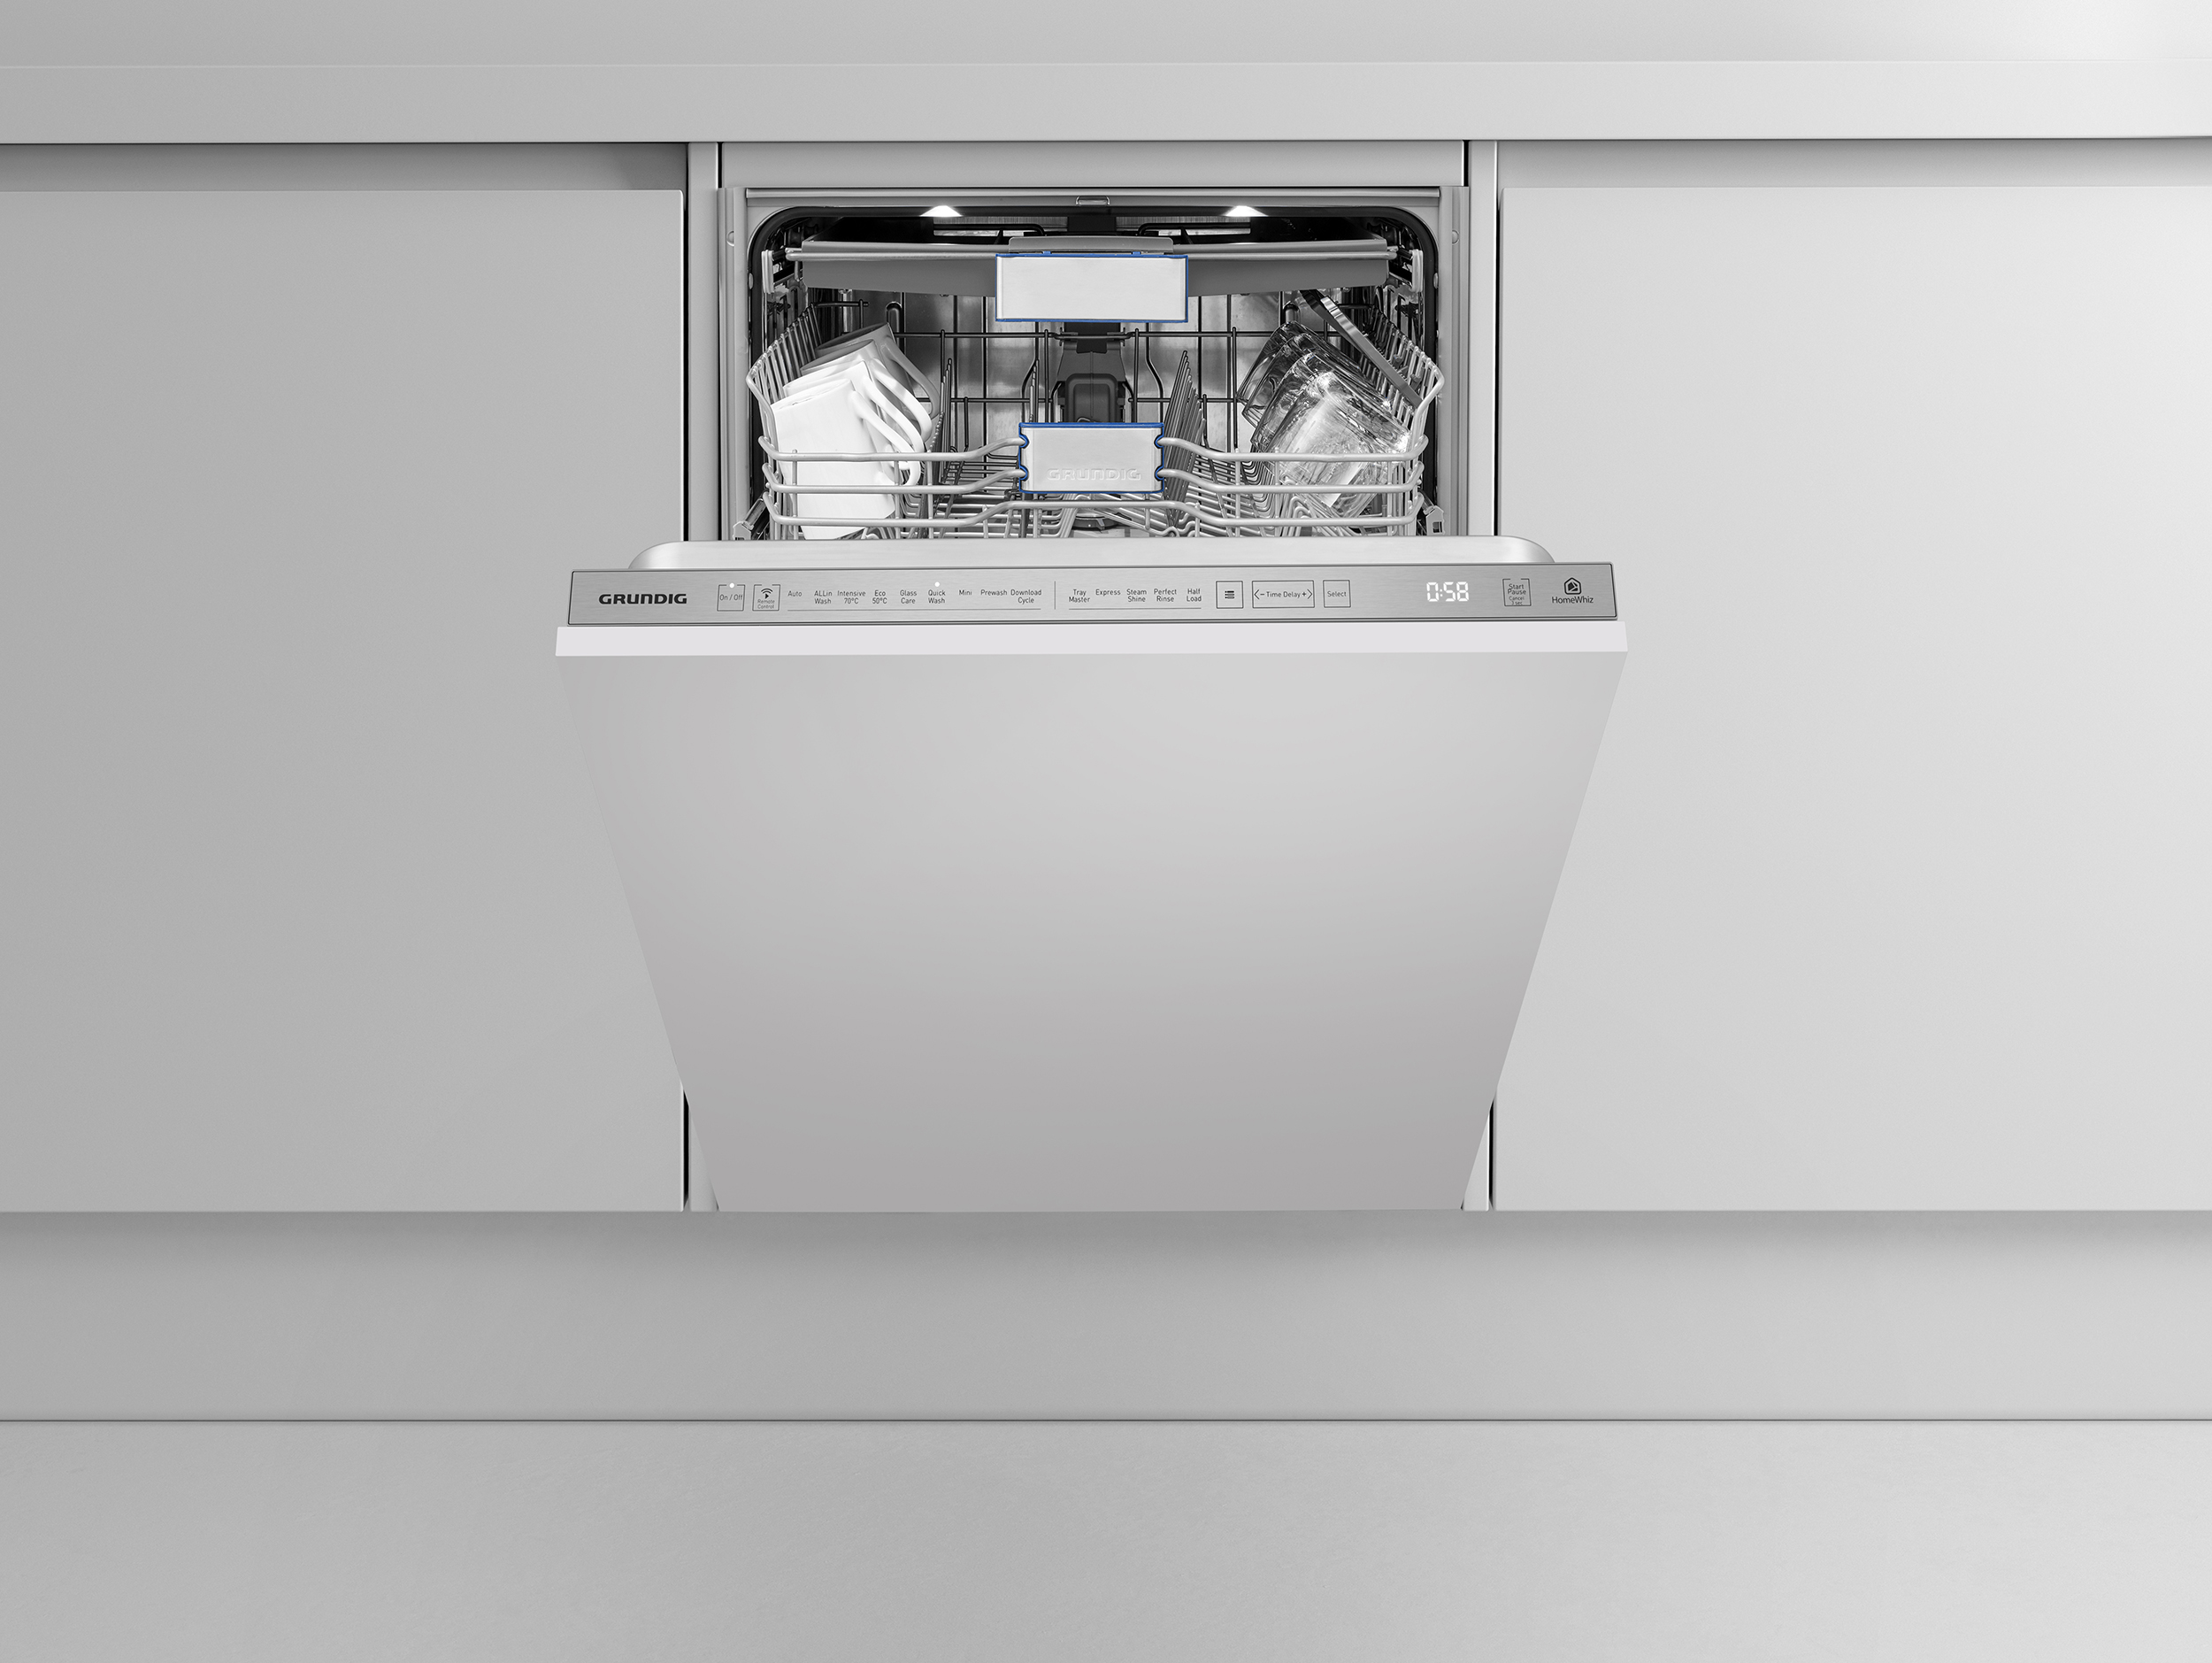 Integrated Full Size dishwasher HomeWhiz Connectivity GNV42920H